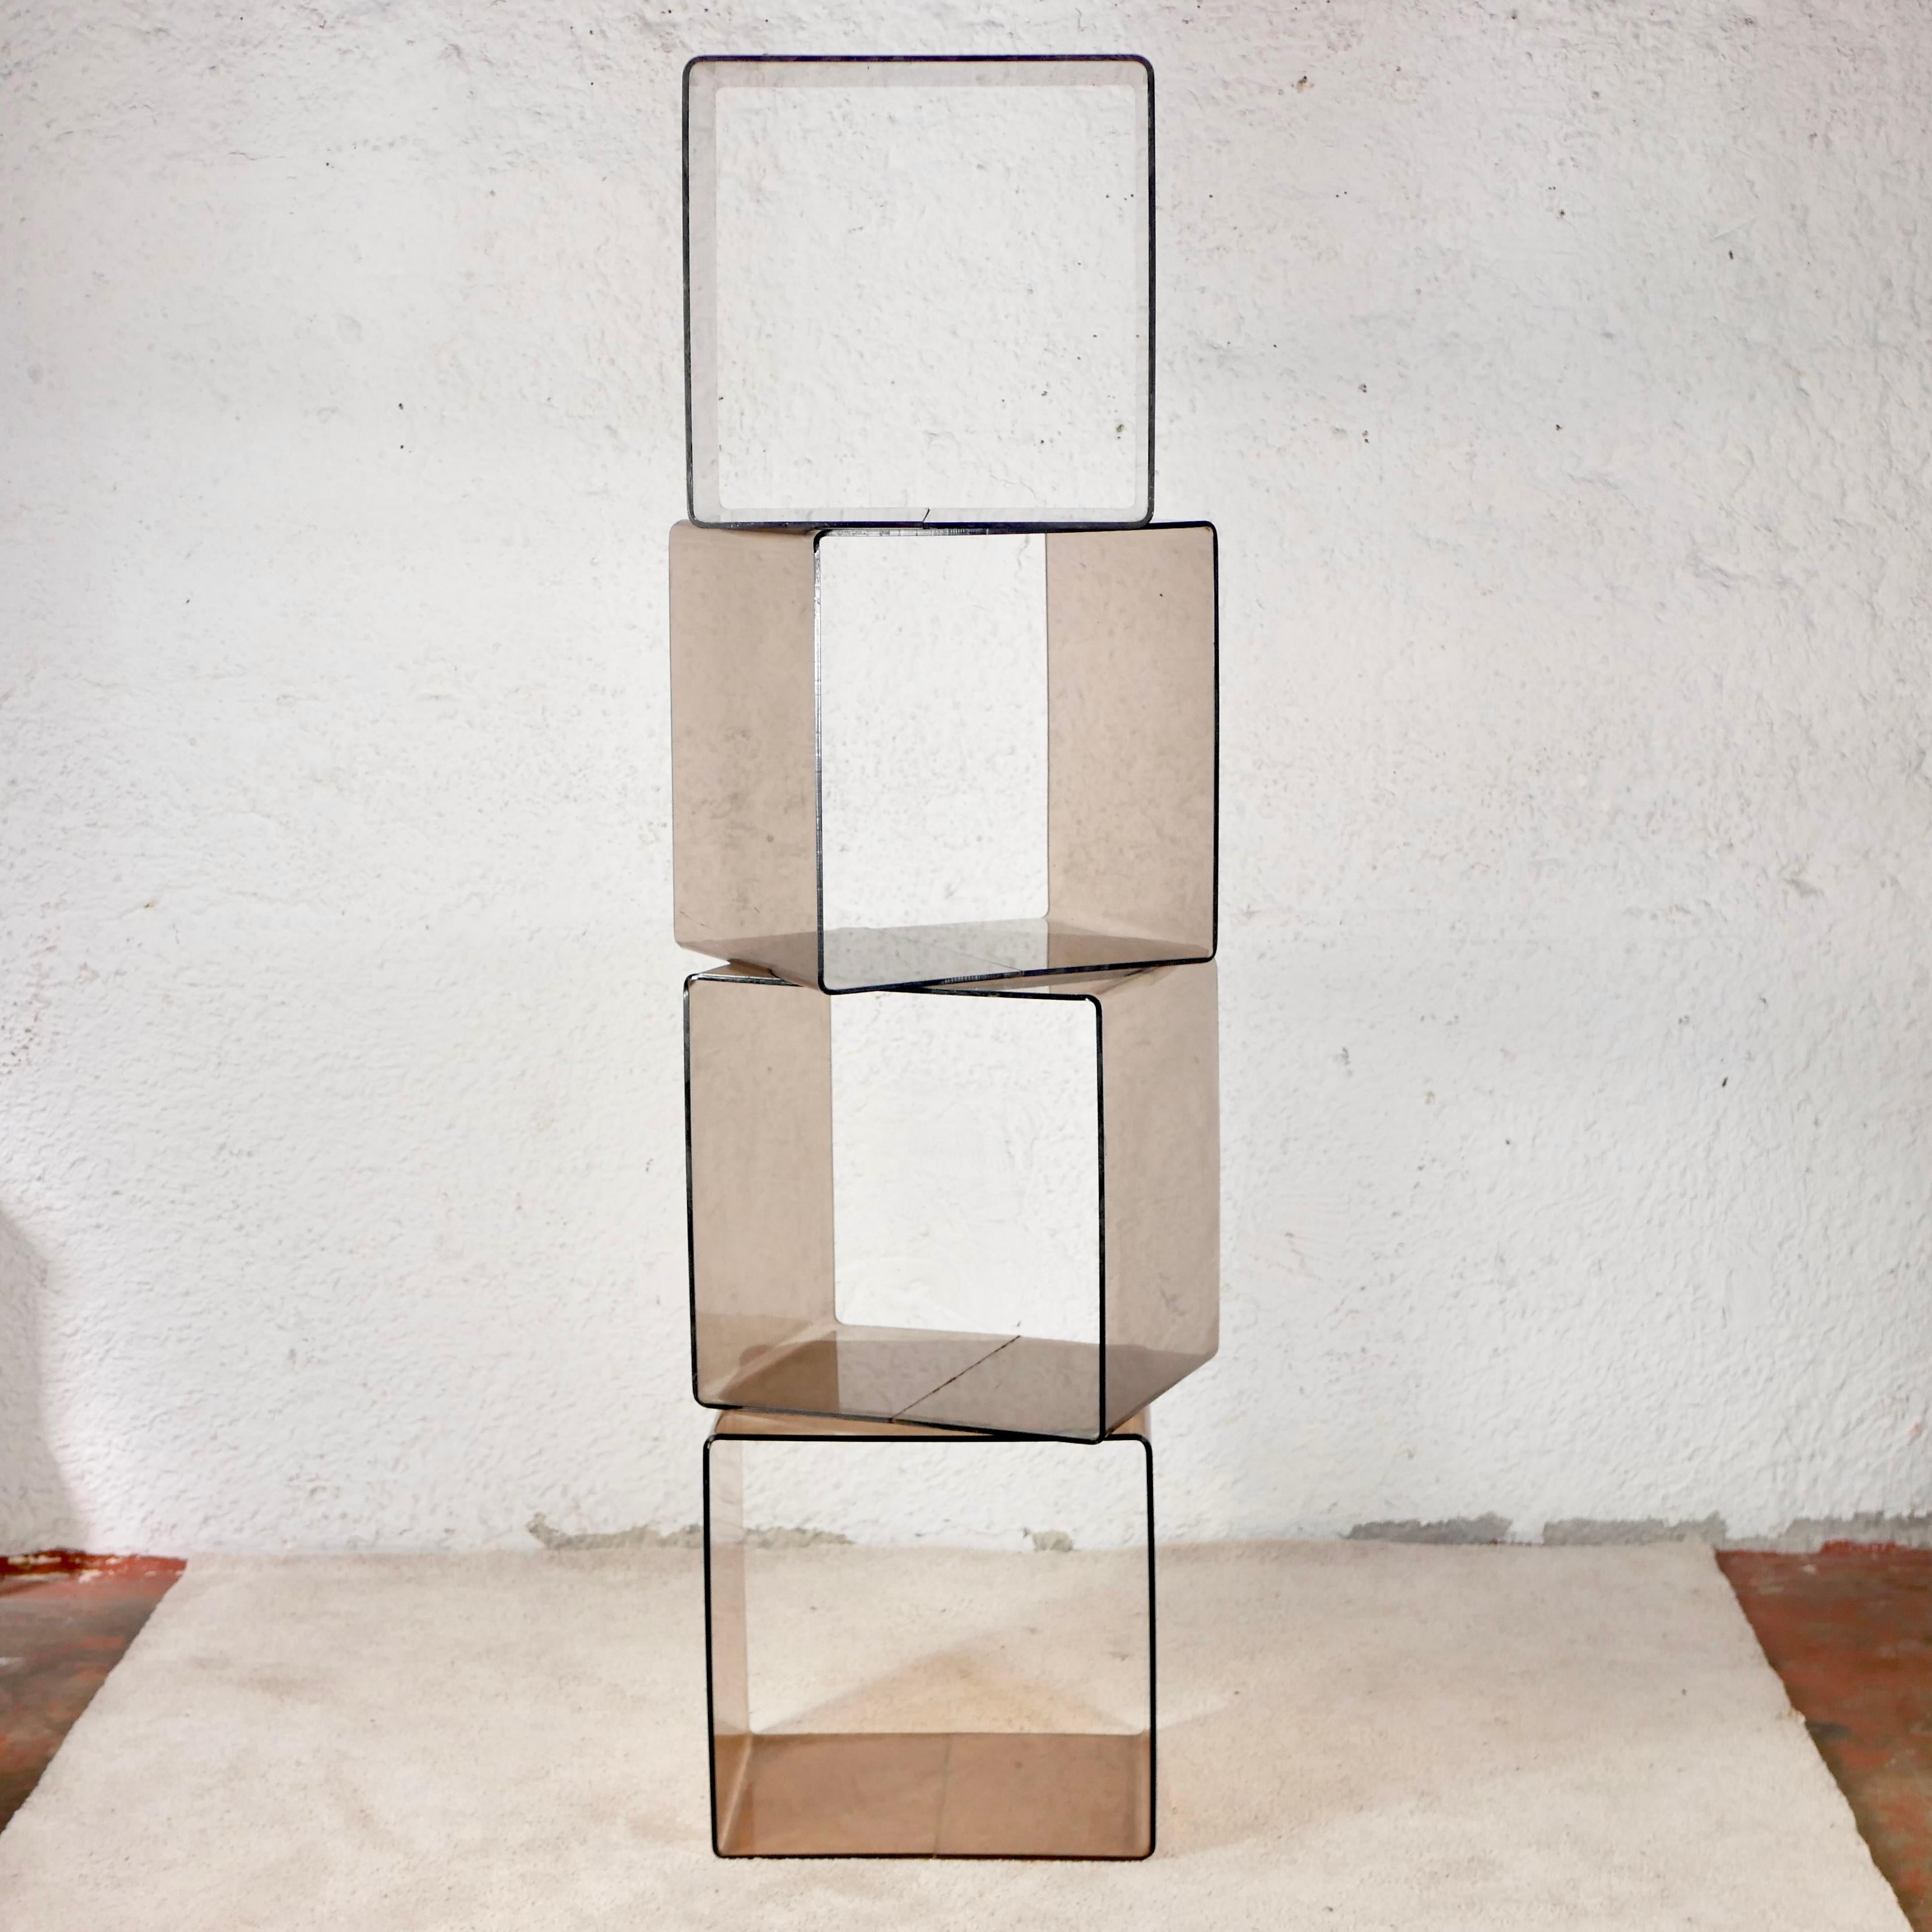 Set of 4 plexiglass cubes designed by Michel Dumas for Roche Bobois in the 1970s in France.
They are very practical as they can be installed anywhere to store your clothes, plants, books etc., and can be completed with other cubes.
Pink smoked